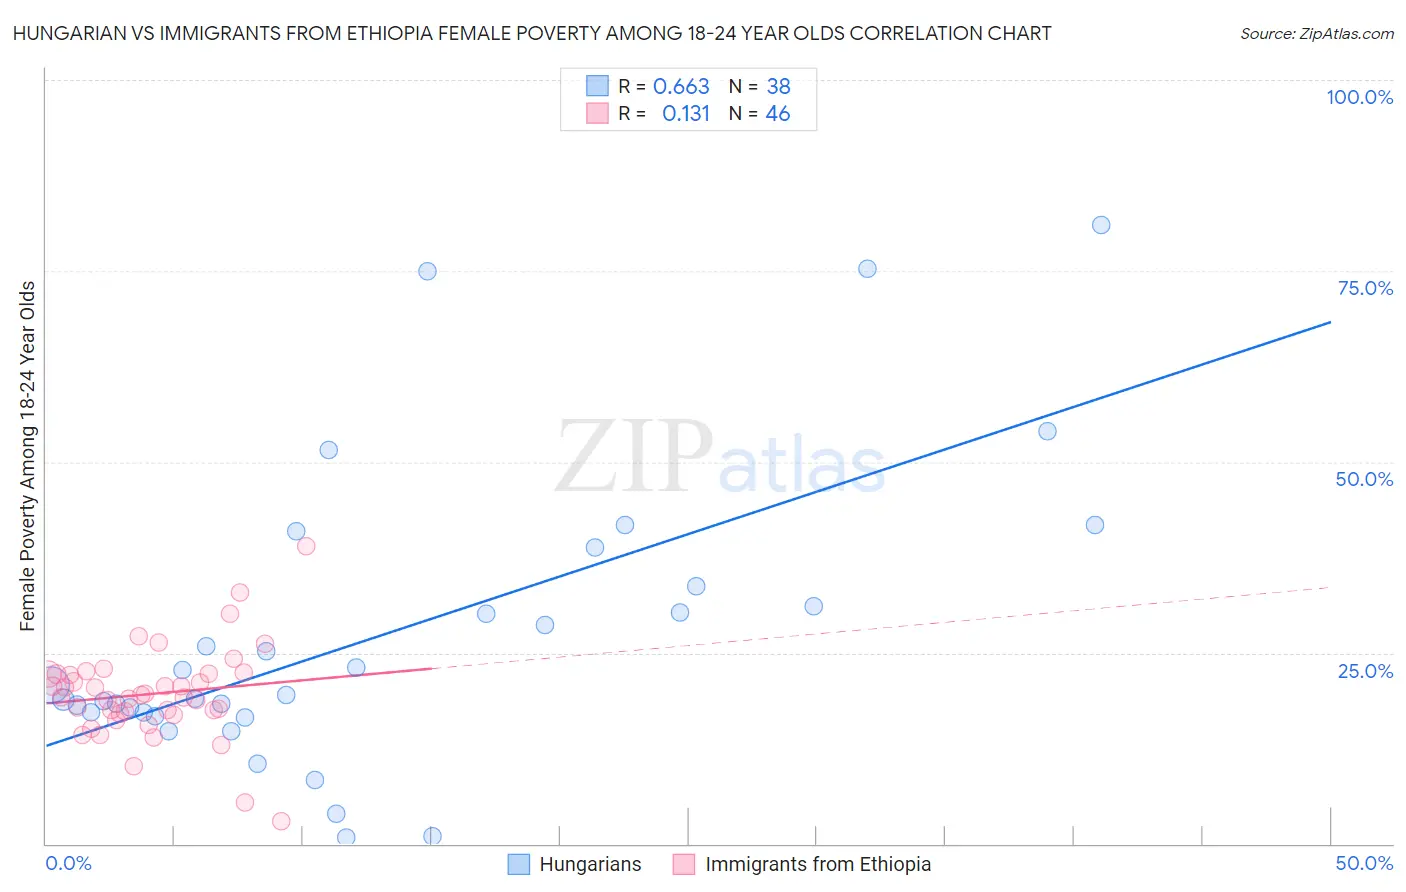 Hungarian vs Immigrants from Ethiopia Female Poverty Among 18-24 Year Olds